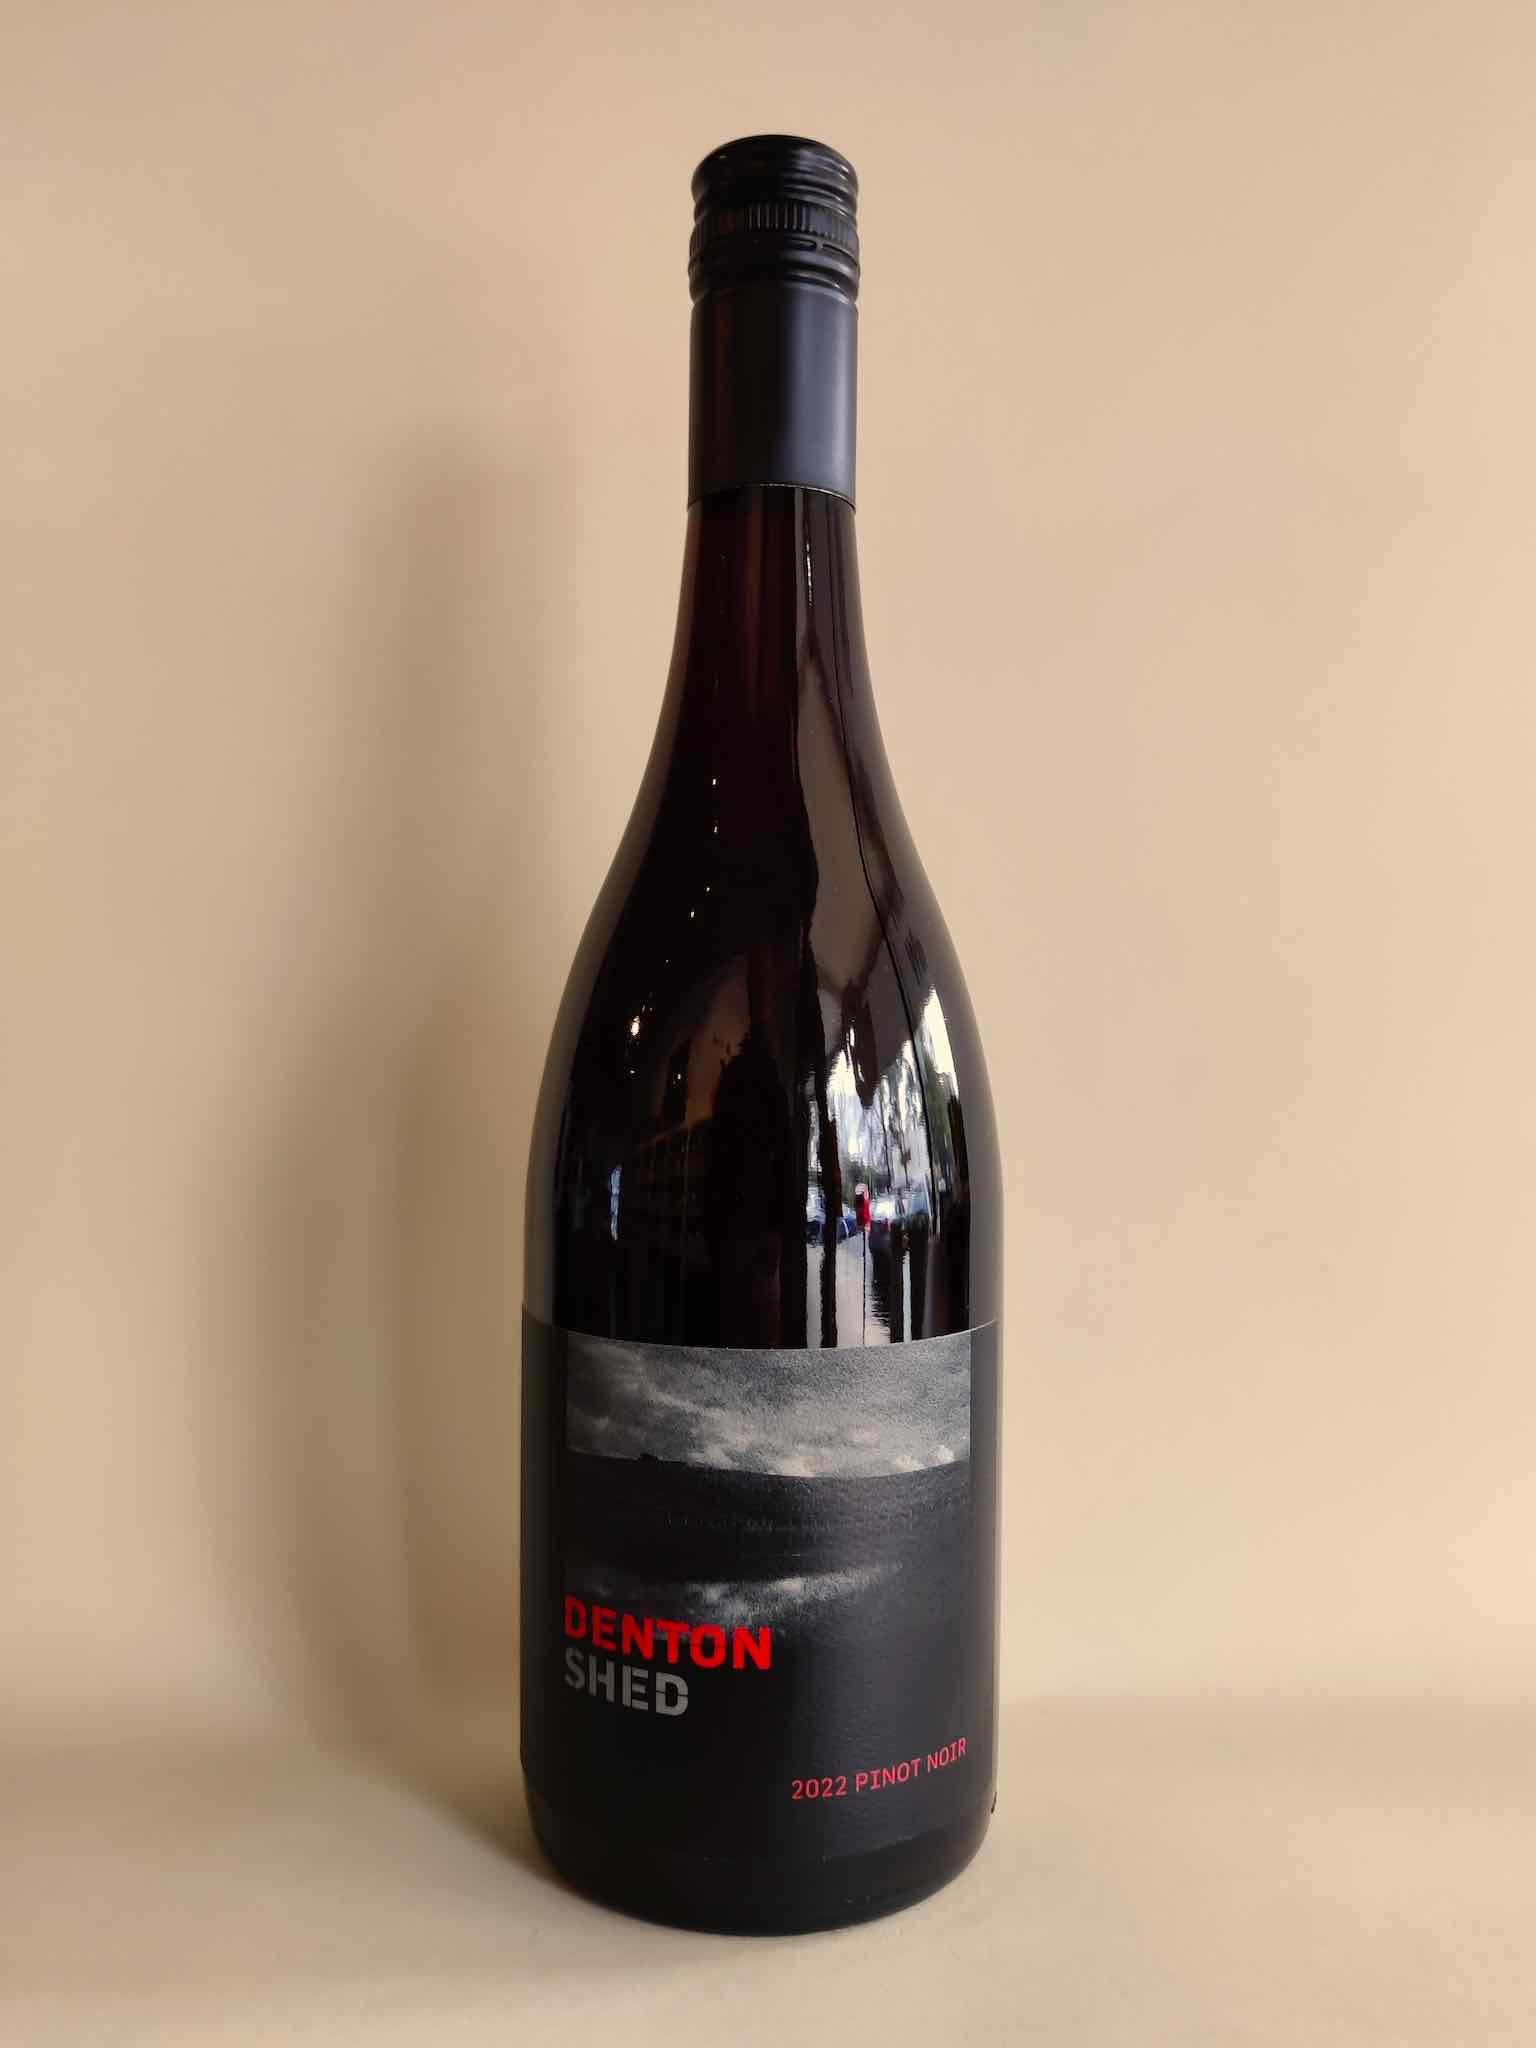 A bottle of Denton Shed Pinot Noir from the Yarra Valley, Victoria.